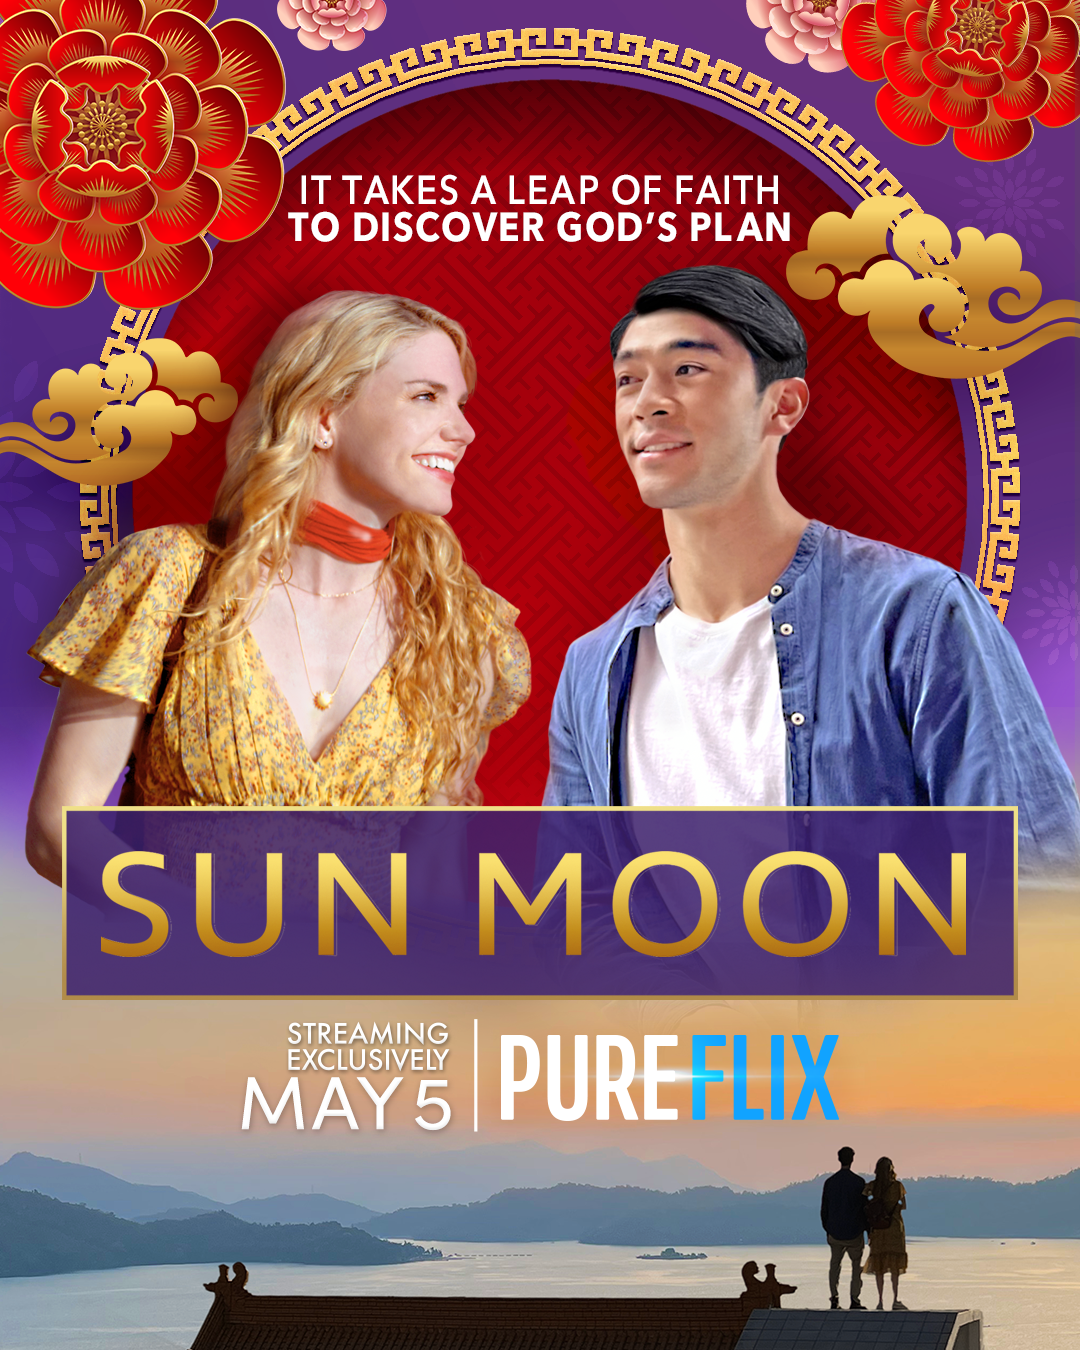 Sun moon premieres on Pure Flix May 5, 2023